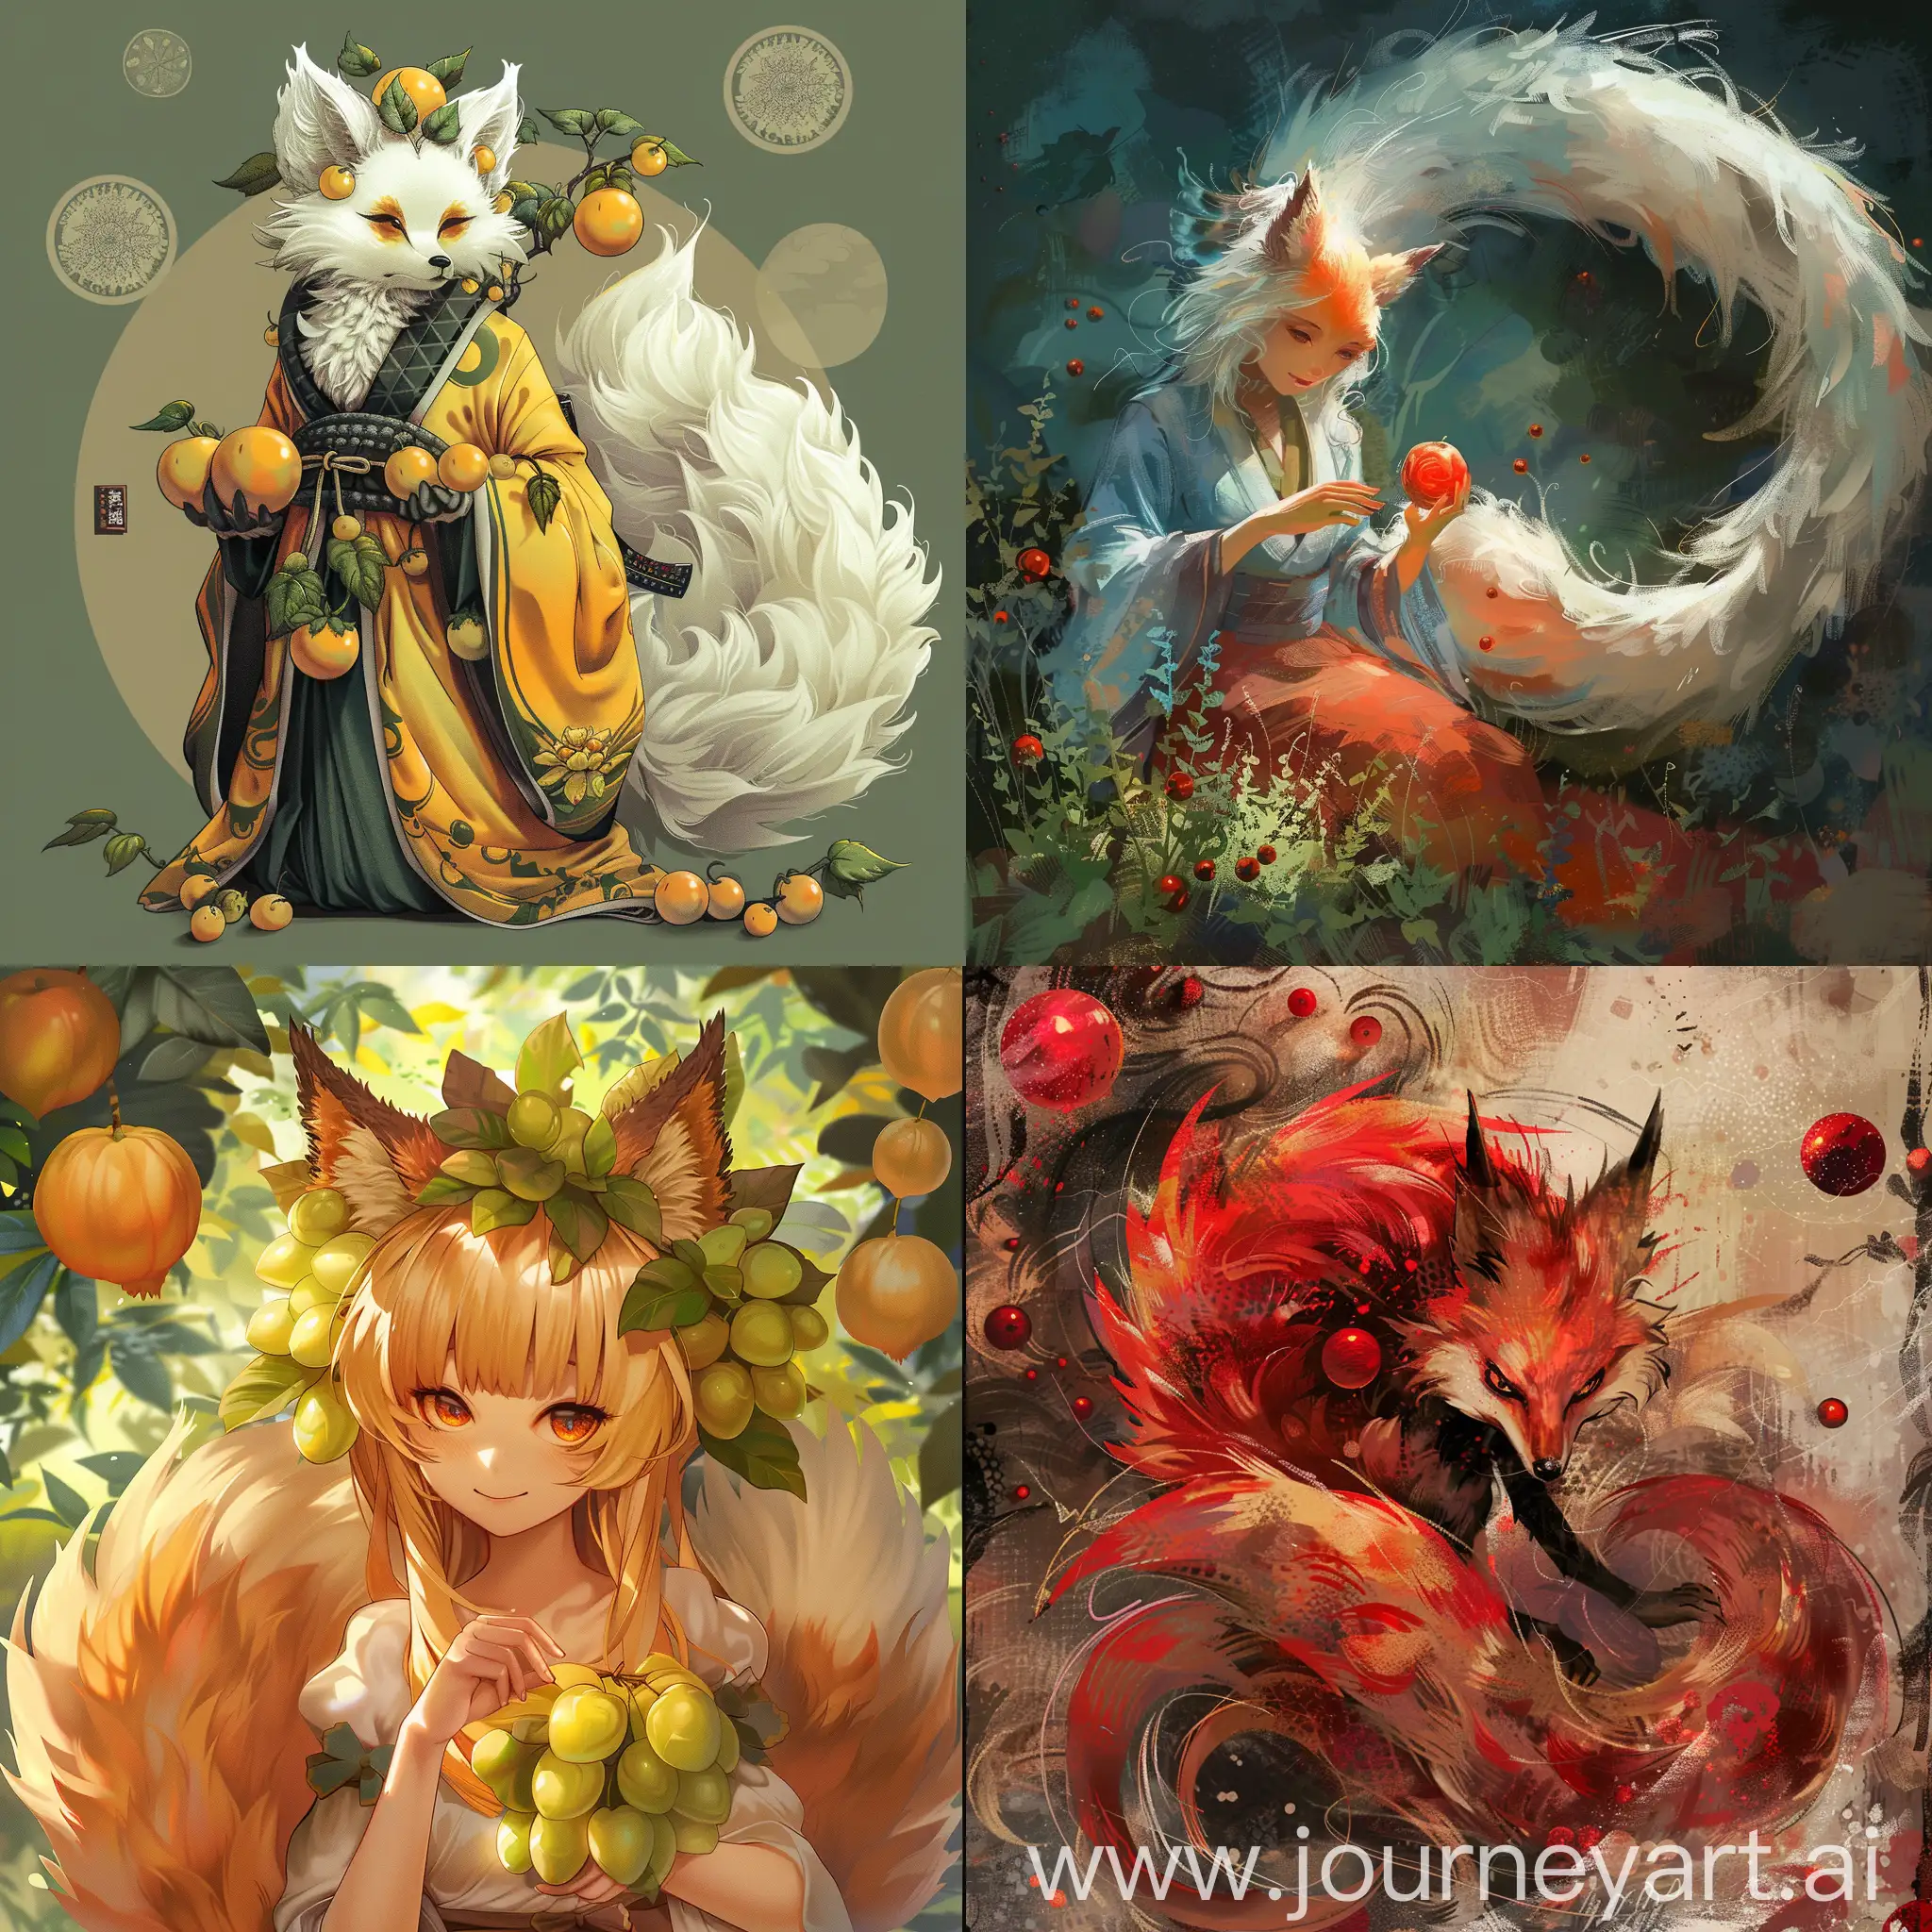 User-of-the-NineTailed-Fox-Fruit-Creating-Artistic-Visions